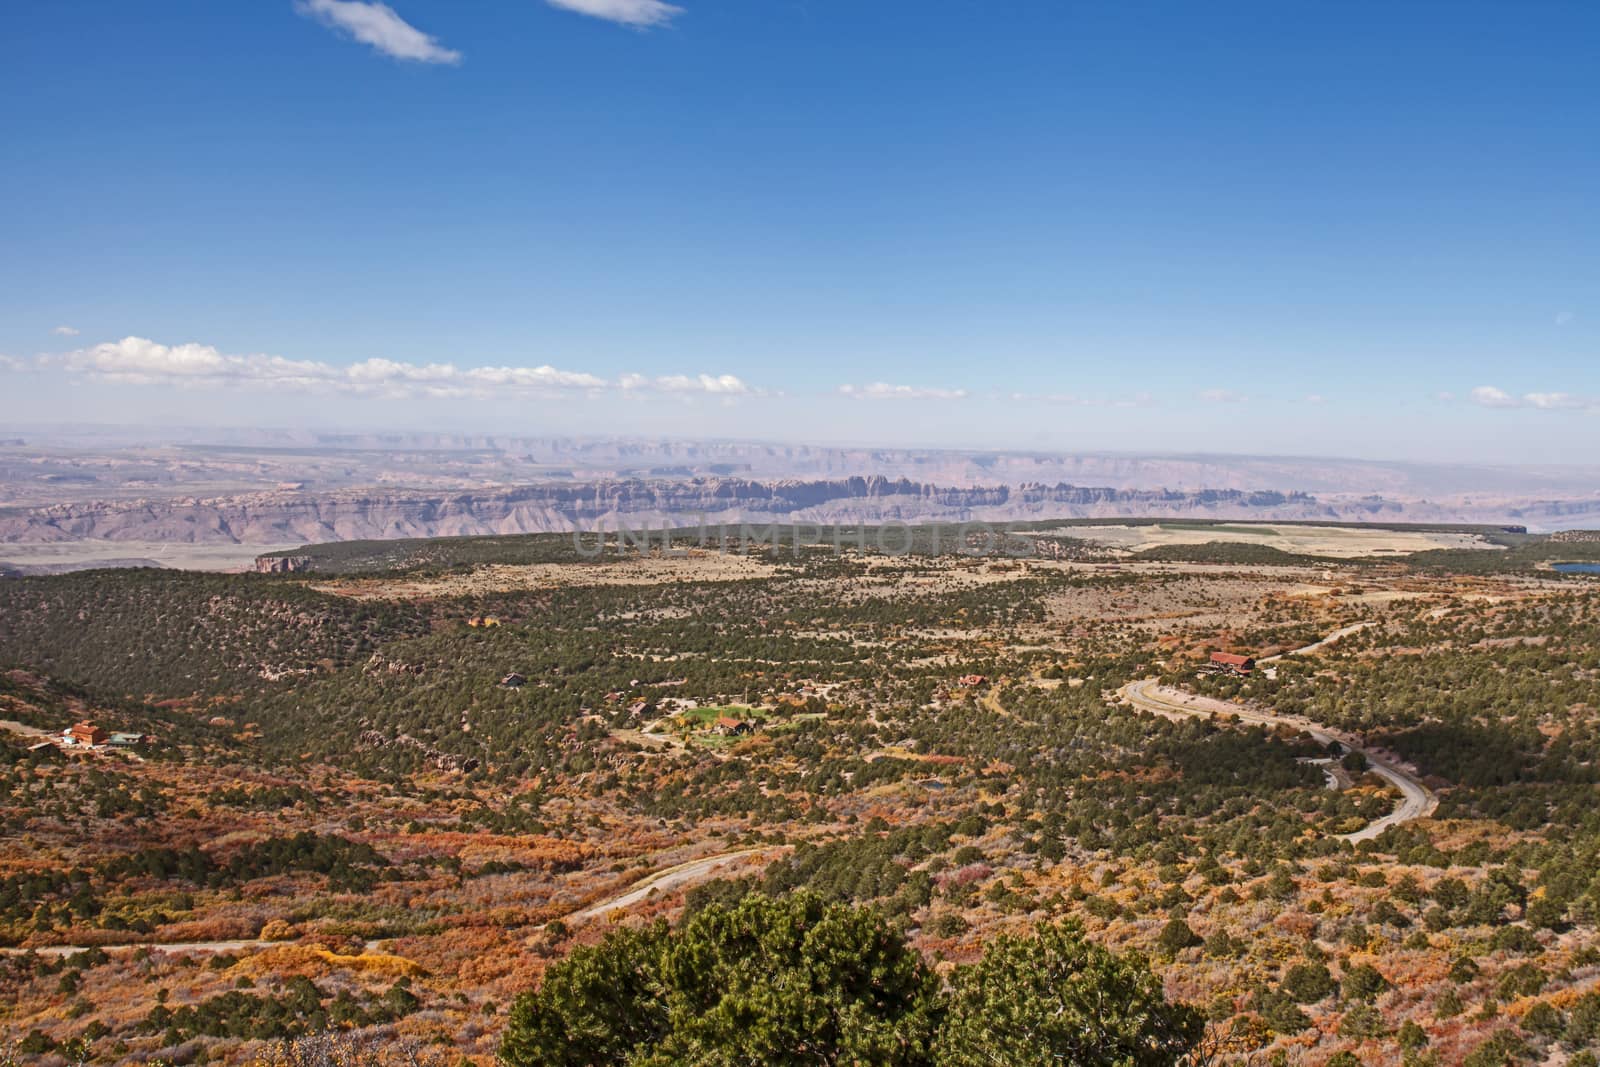 View over Utah from the Manti-La Sal Mountains with Canyonlands National Park visible in the distance.